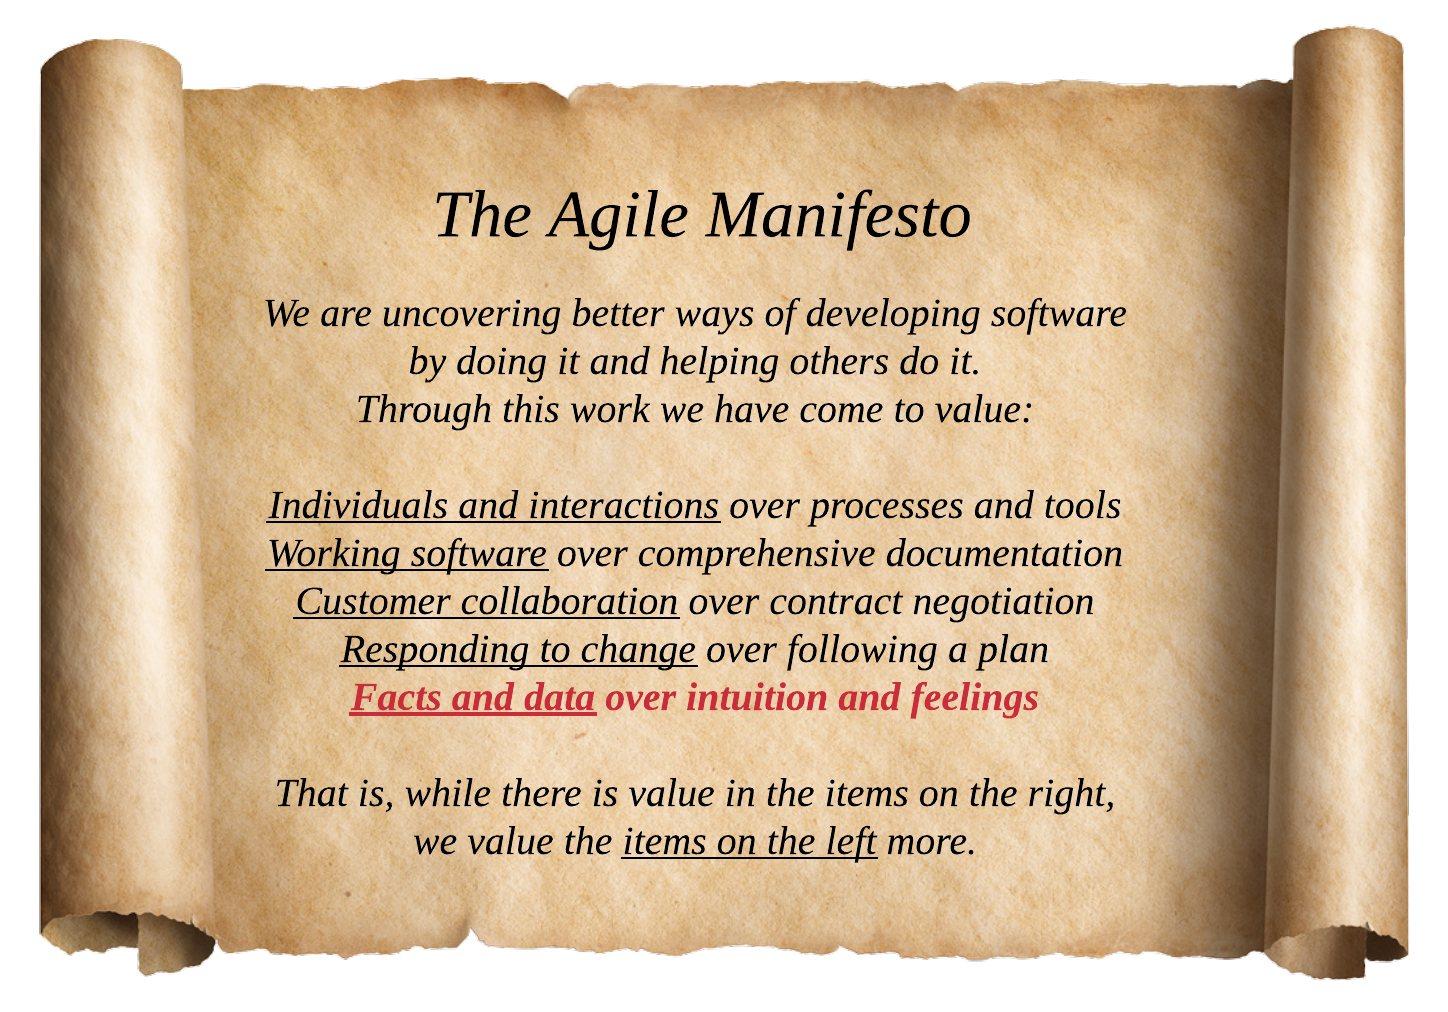 Is it Time to Amend the Agile Manifesto? | lucidLIFT